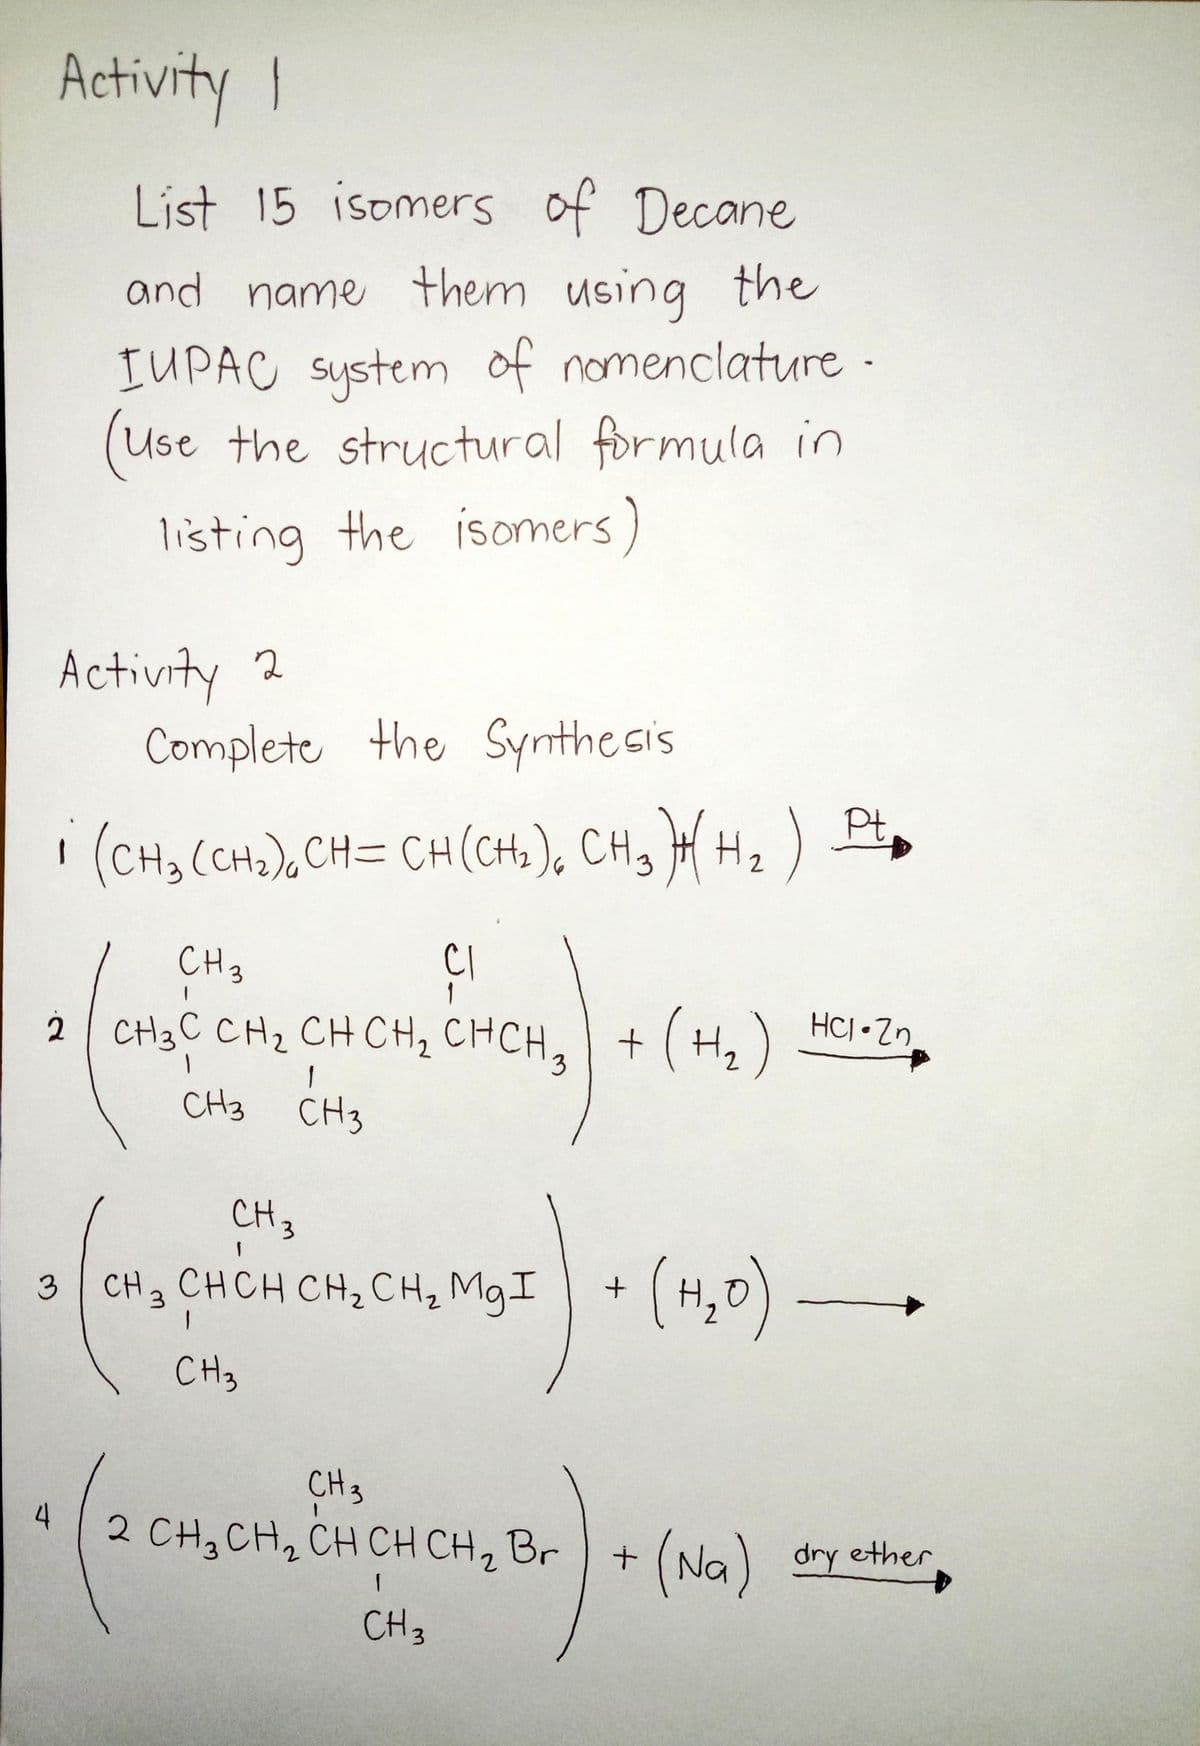 Activity I
List 15 isomers of Decane
and name them using the
IUPAC System of nomenclature -
(Use the structural formula in
listing the isomers)
Activity 2
Complete the Synthesis
Pt
| (CH3 (CH2),CH= CH(CH), CH, H H2)
9.
CH 3
Cl
1
2 CH3C CH2 CH CH2 CHCH, +
+(H,)
HCJ Zn
2
CH3
CH3
CH3
3 CH CHCH CH,CH, MgI
(4,0) –
3.
CH3
CH3
2 CH3CH, CH CH CH, Br
4
(Na)
dry ether
CH3
